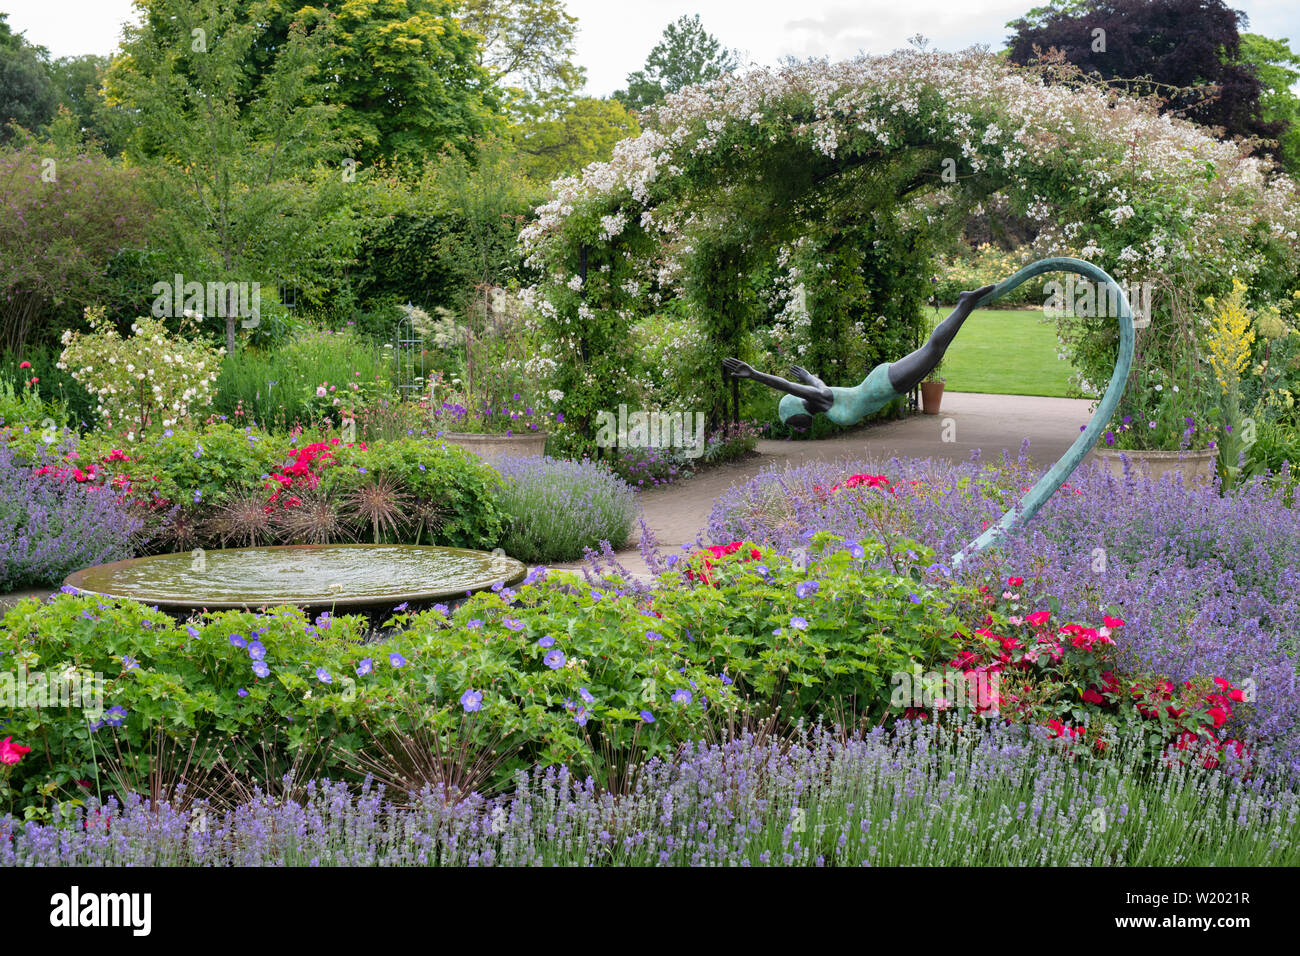 Rhs Garden Wisley Pool High Resolution Stock Photography And Images Alamy